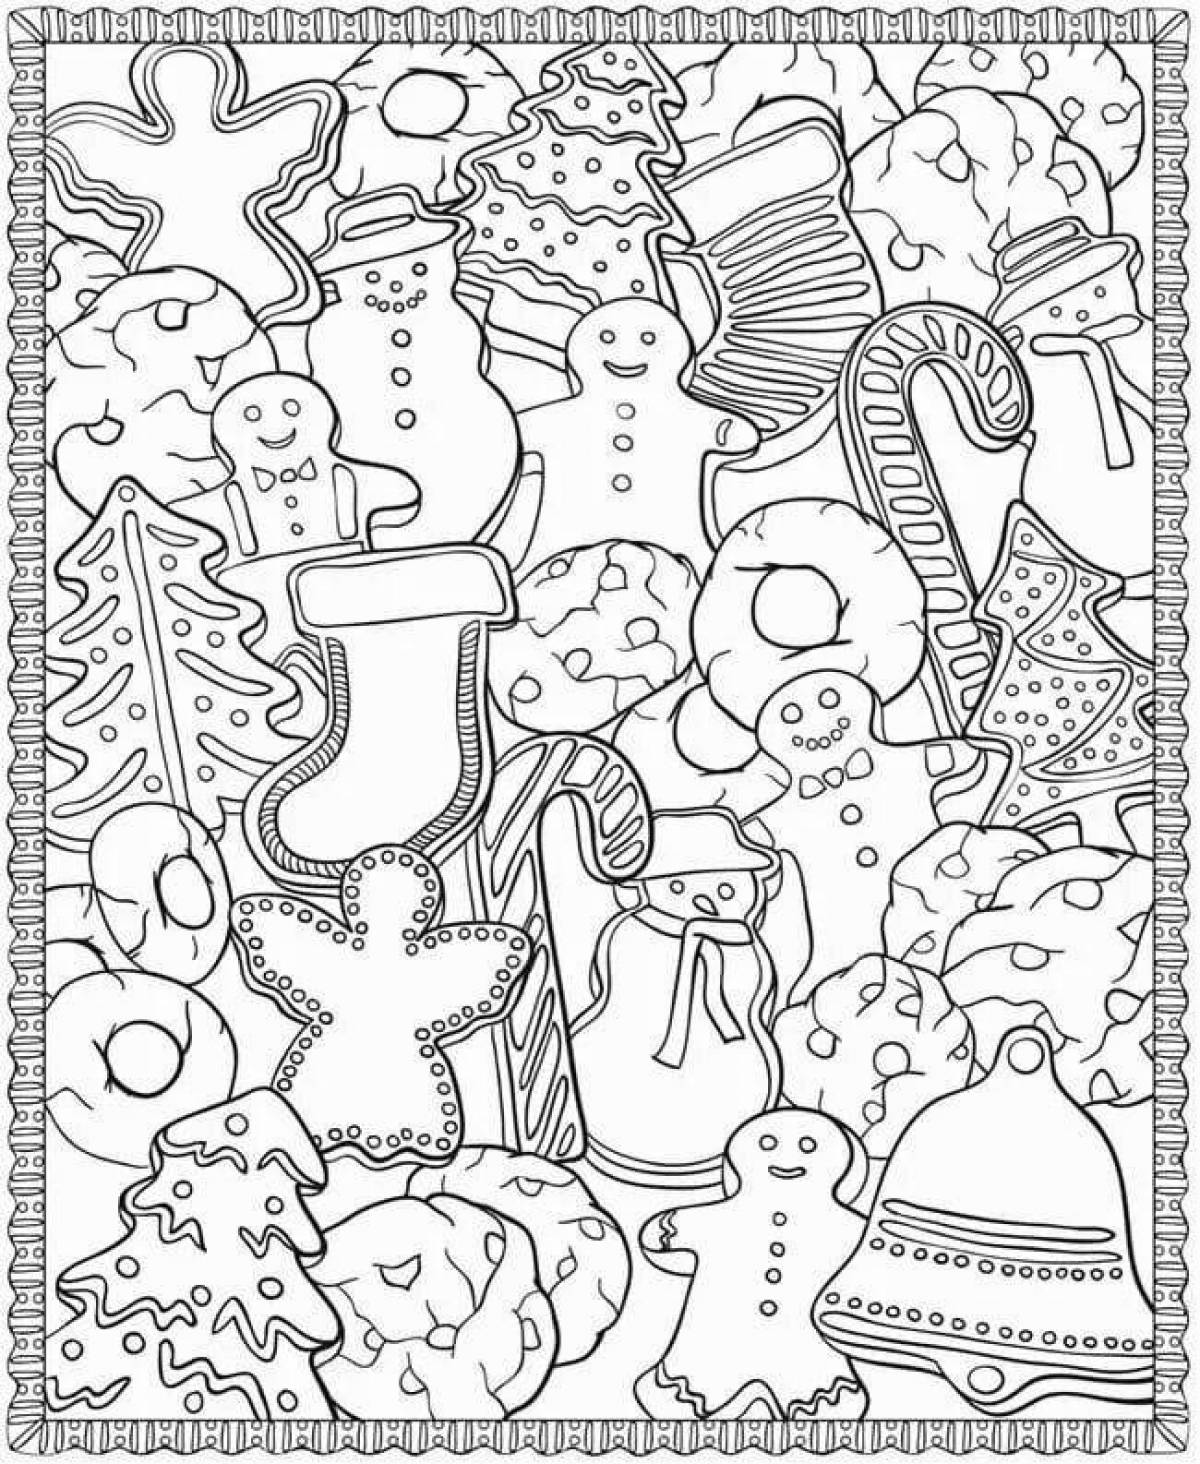 Glorious Christmas coloring book for adults